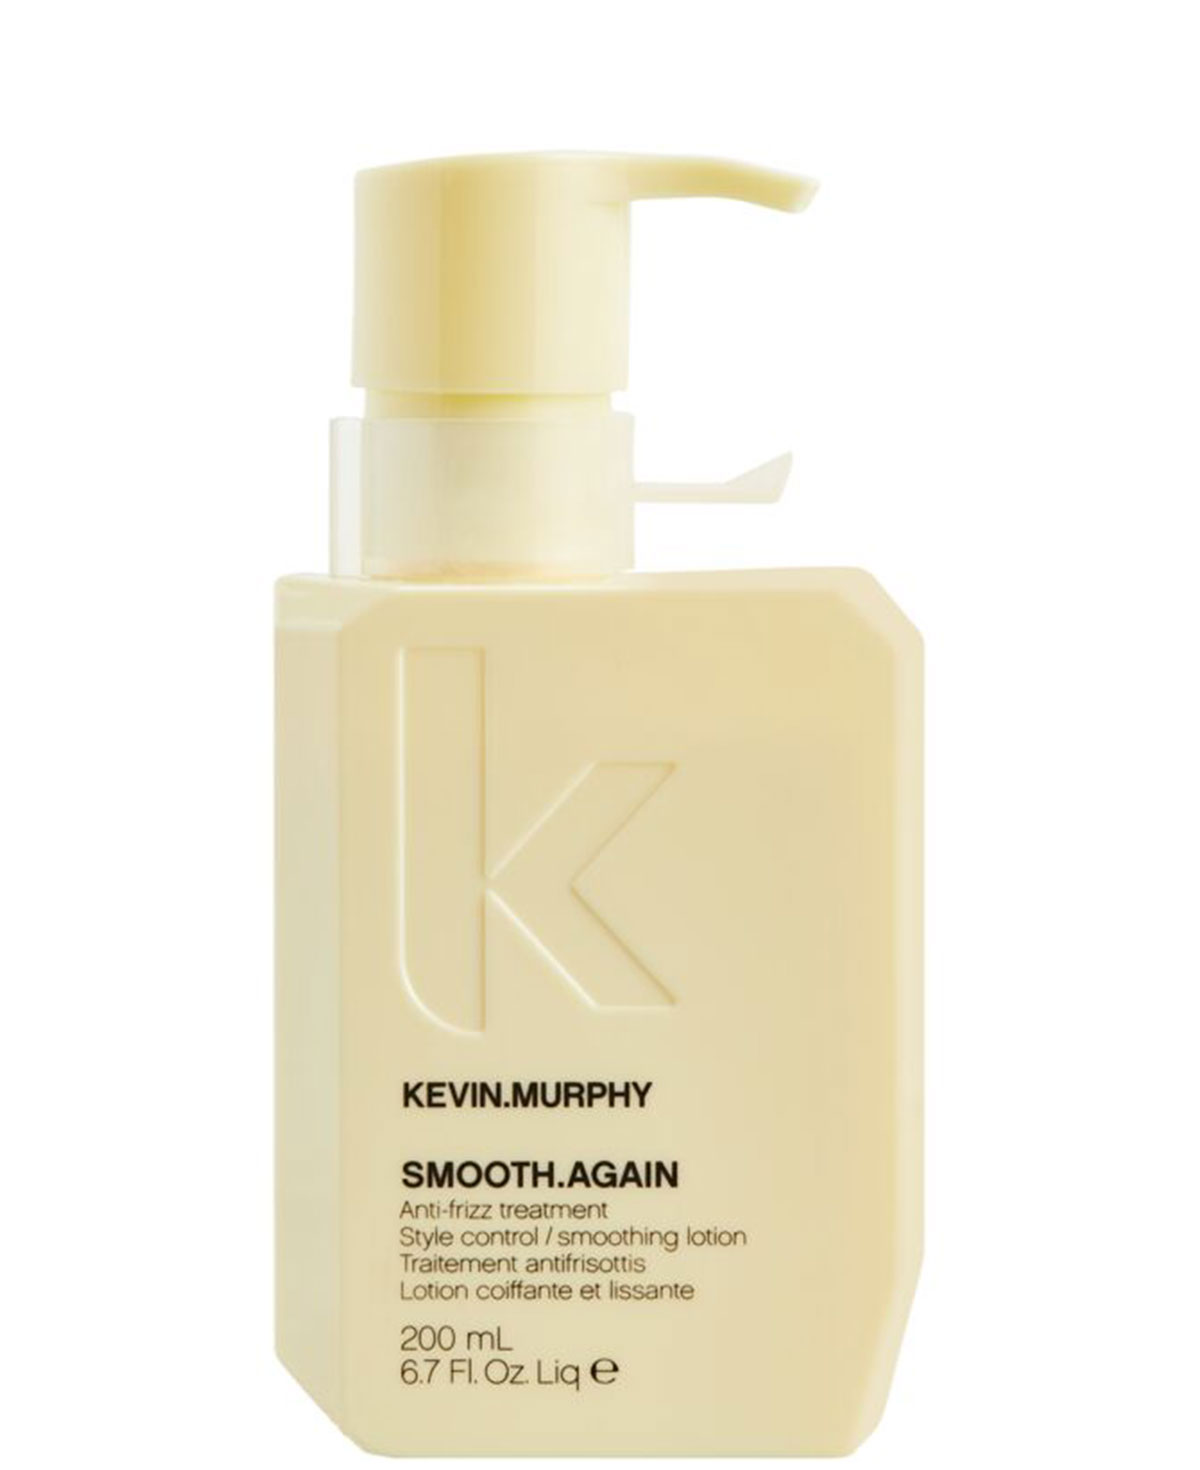 Kevin.Murphy SMOOTH.AGAIN 200ml